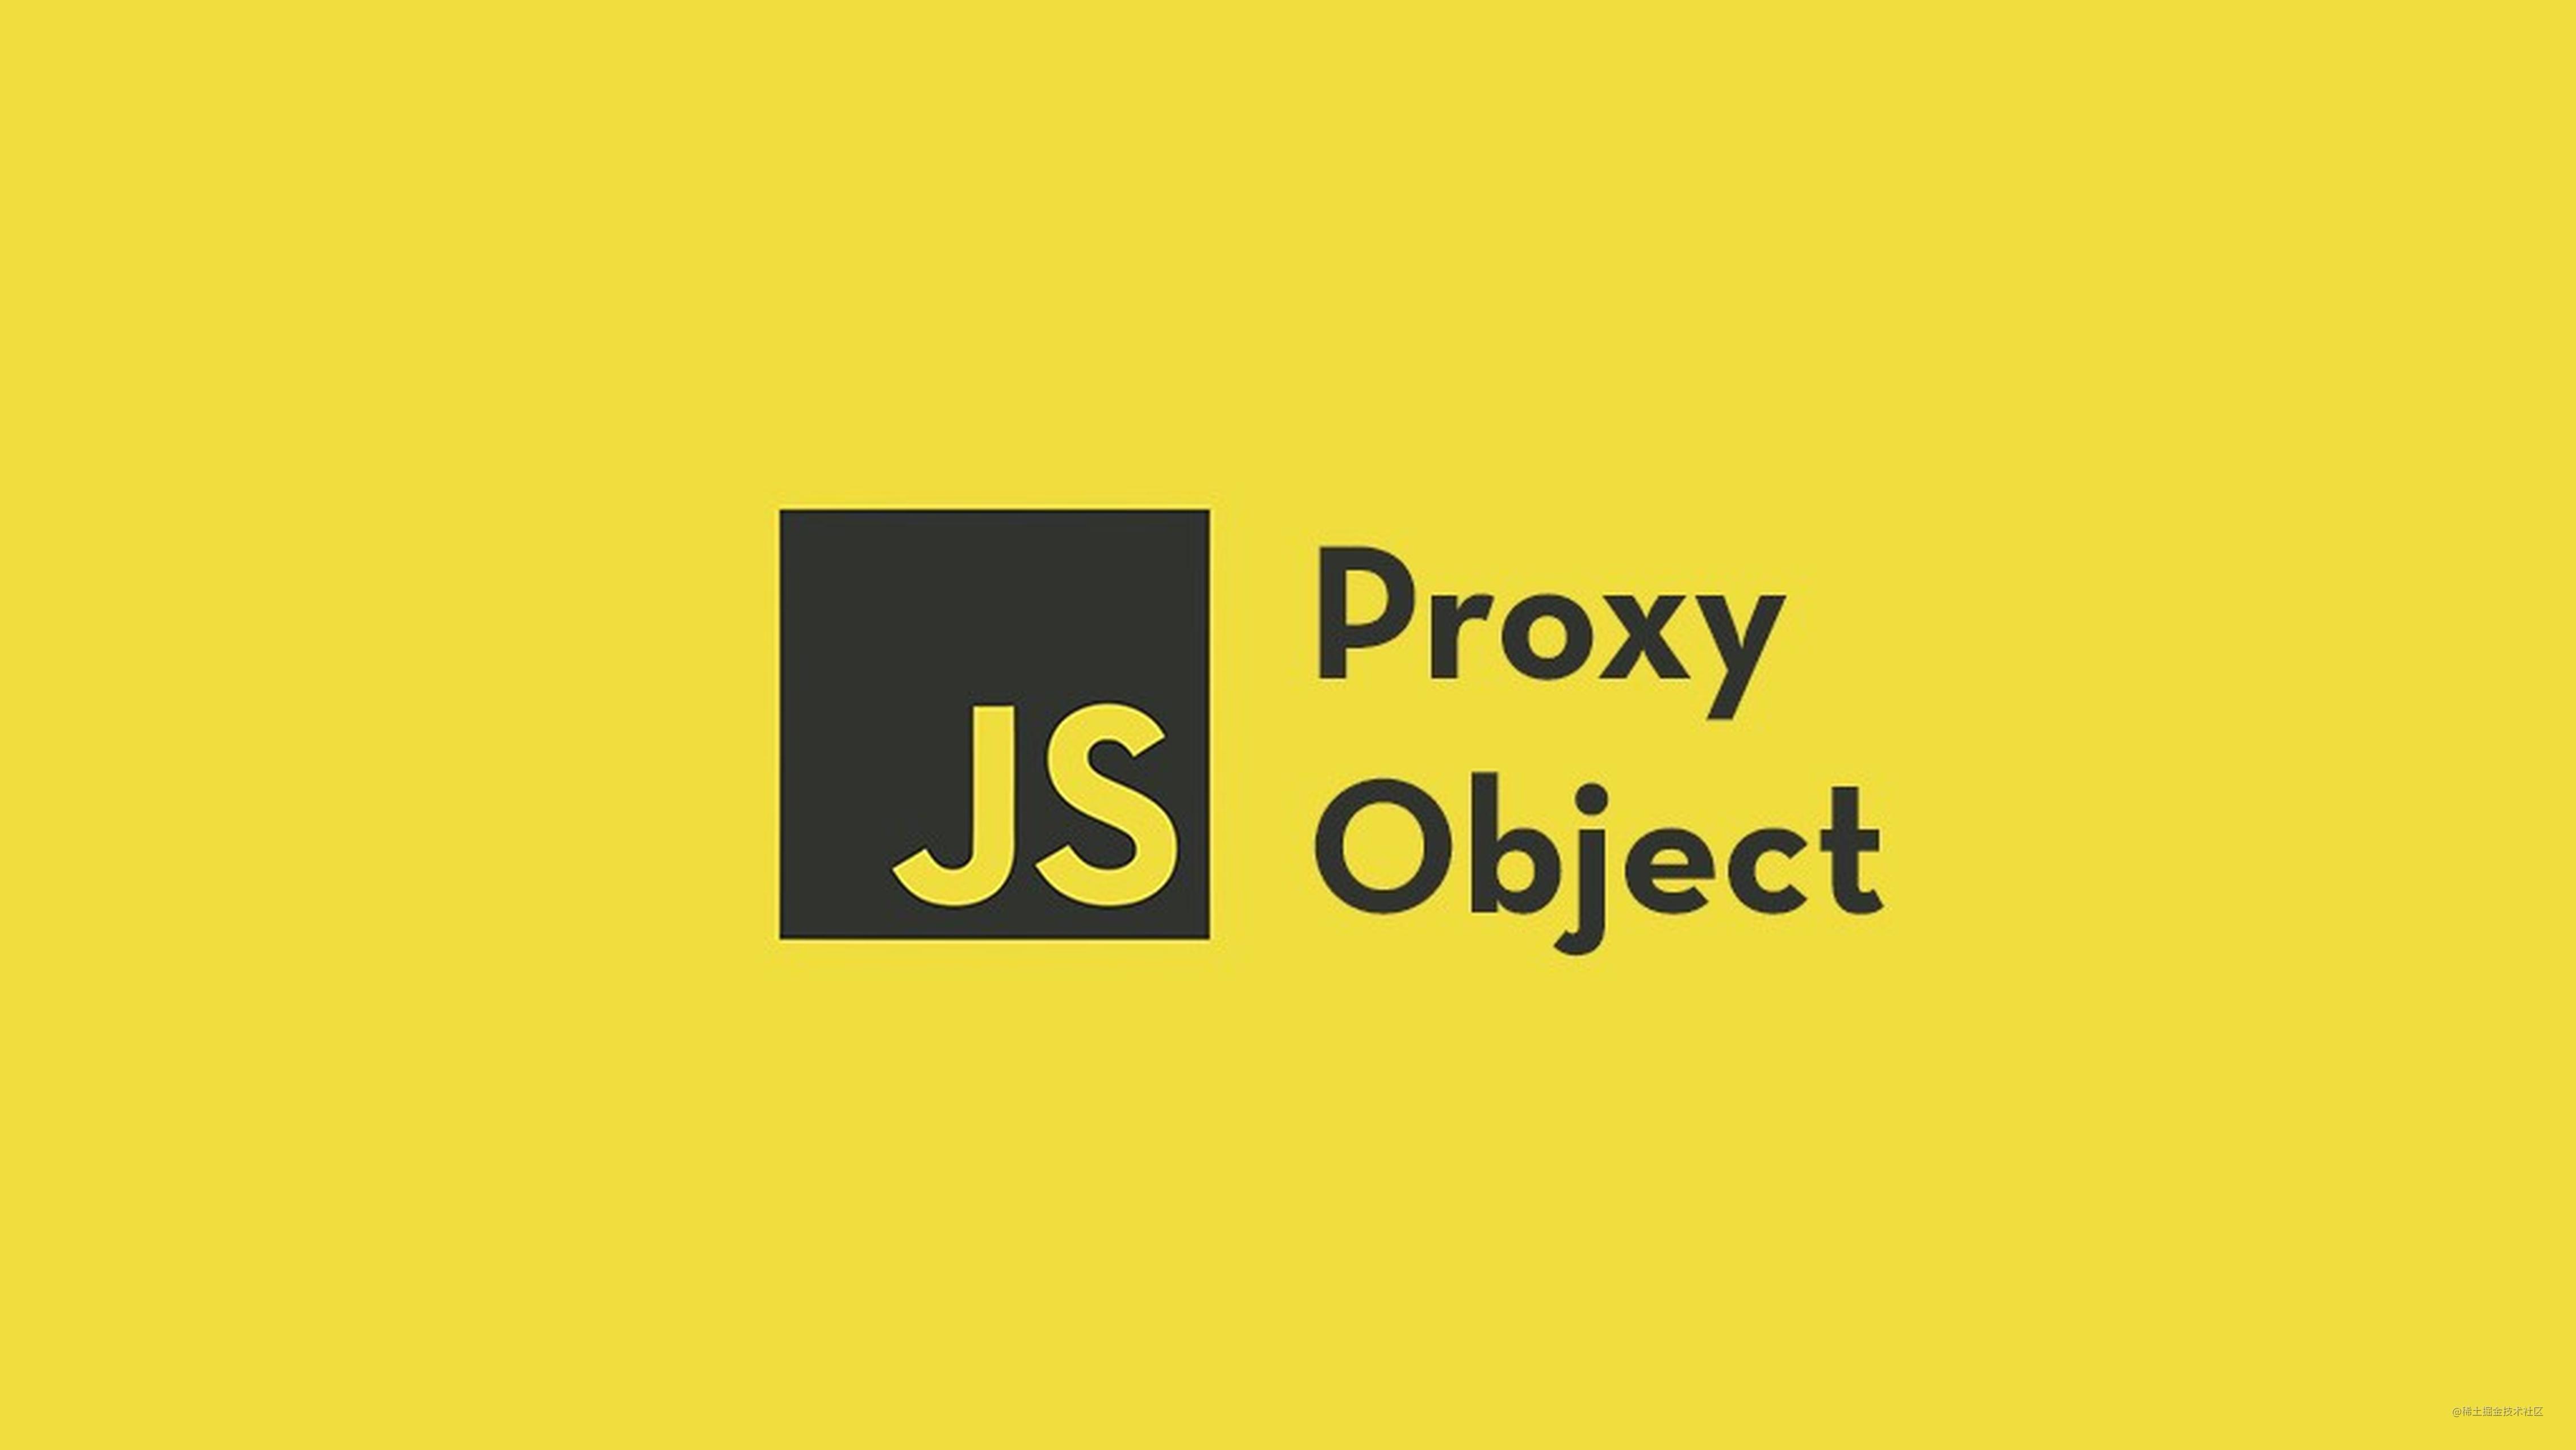 Js collection. Object.entries.